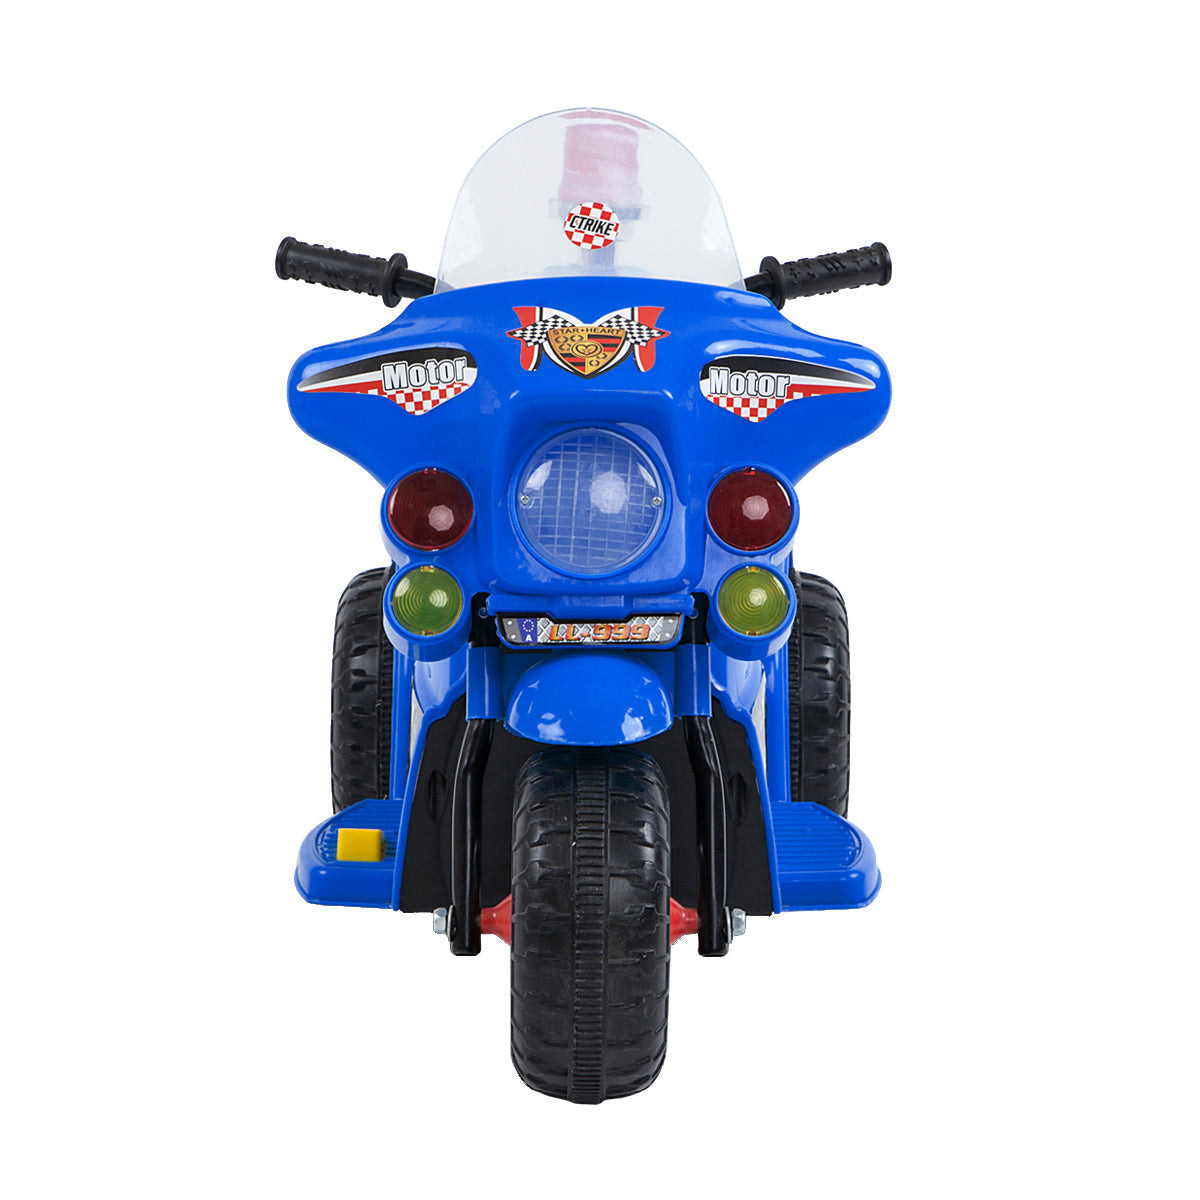 Front view of the blue Children's Electric Ride-on Motorcycle.